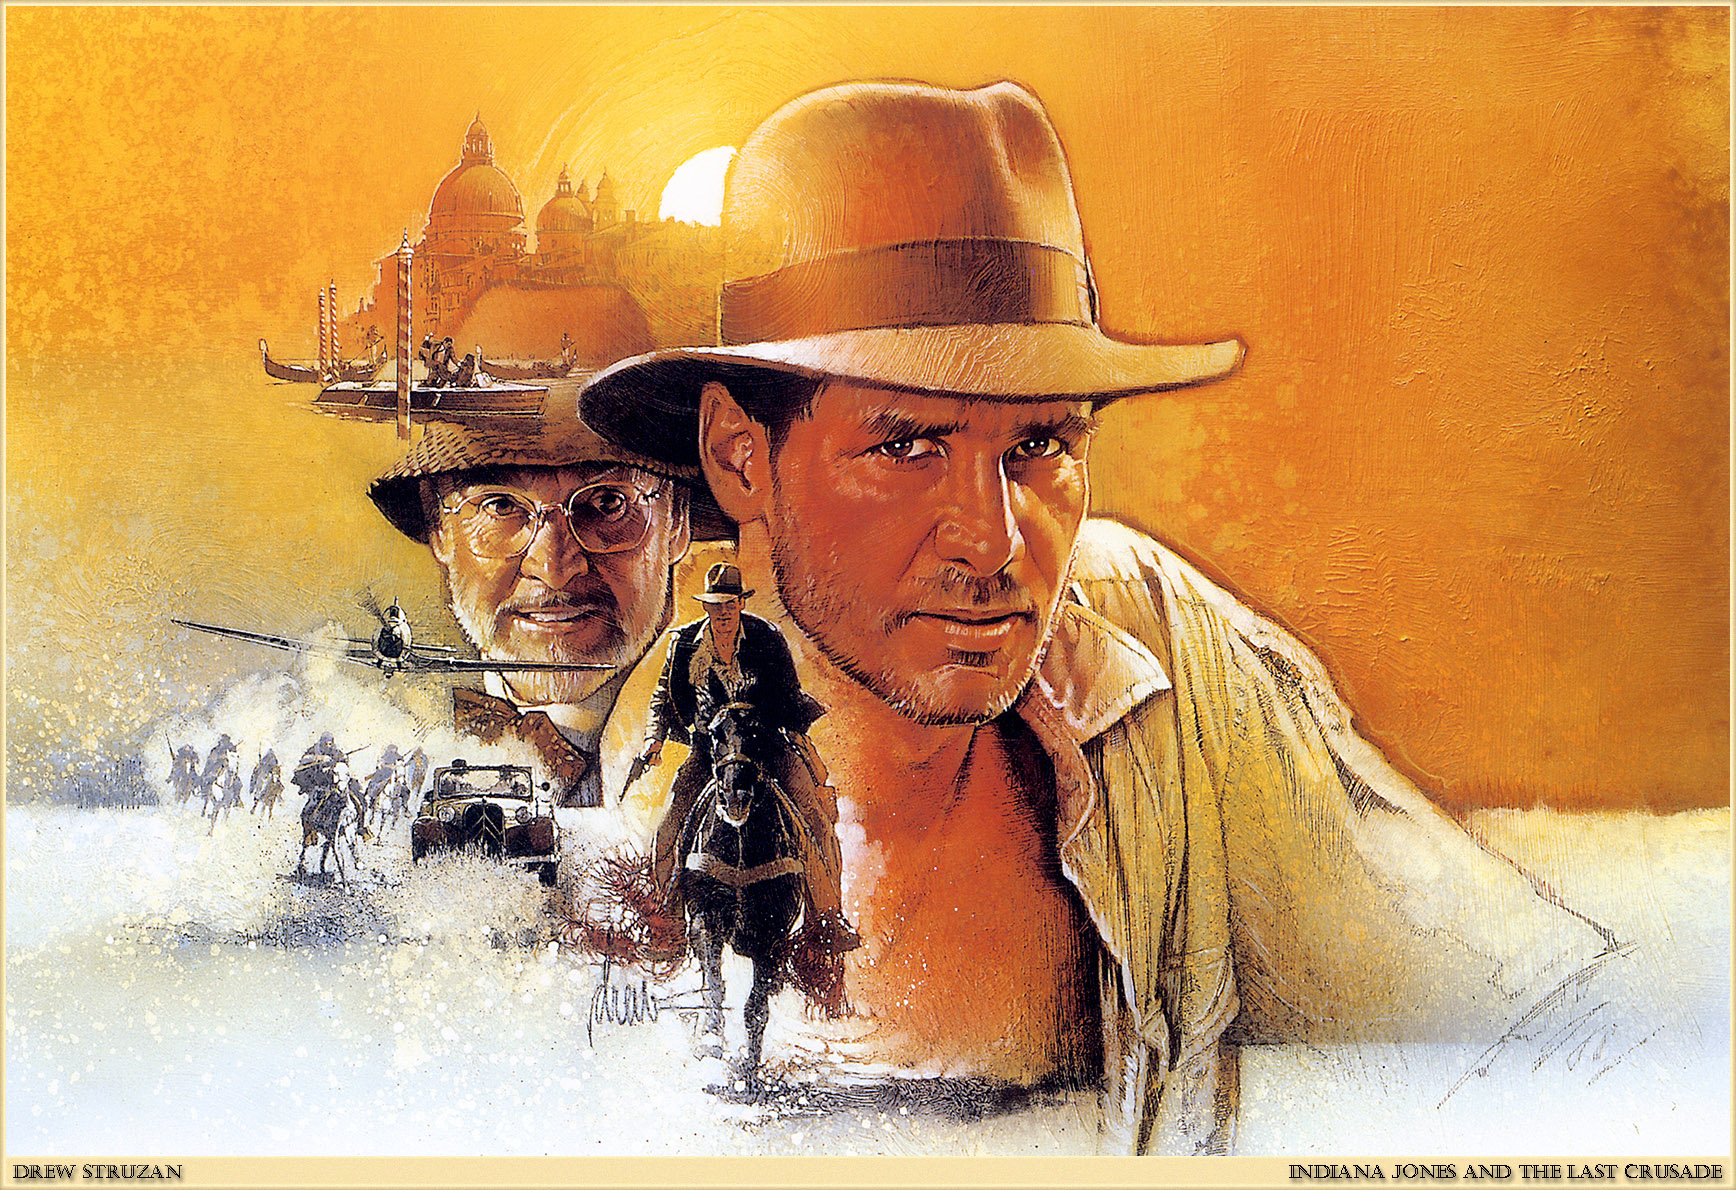 Indiana Jones and the Last Crusade Picture by Drew Struzan